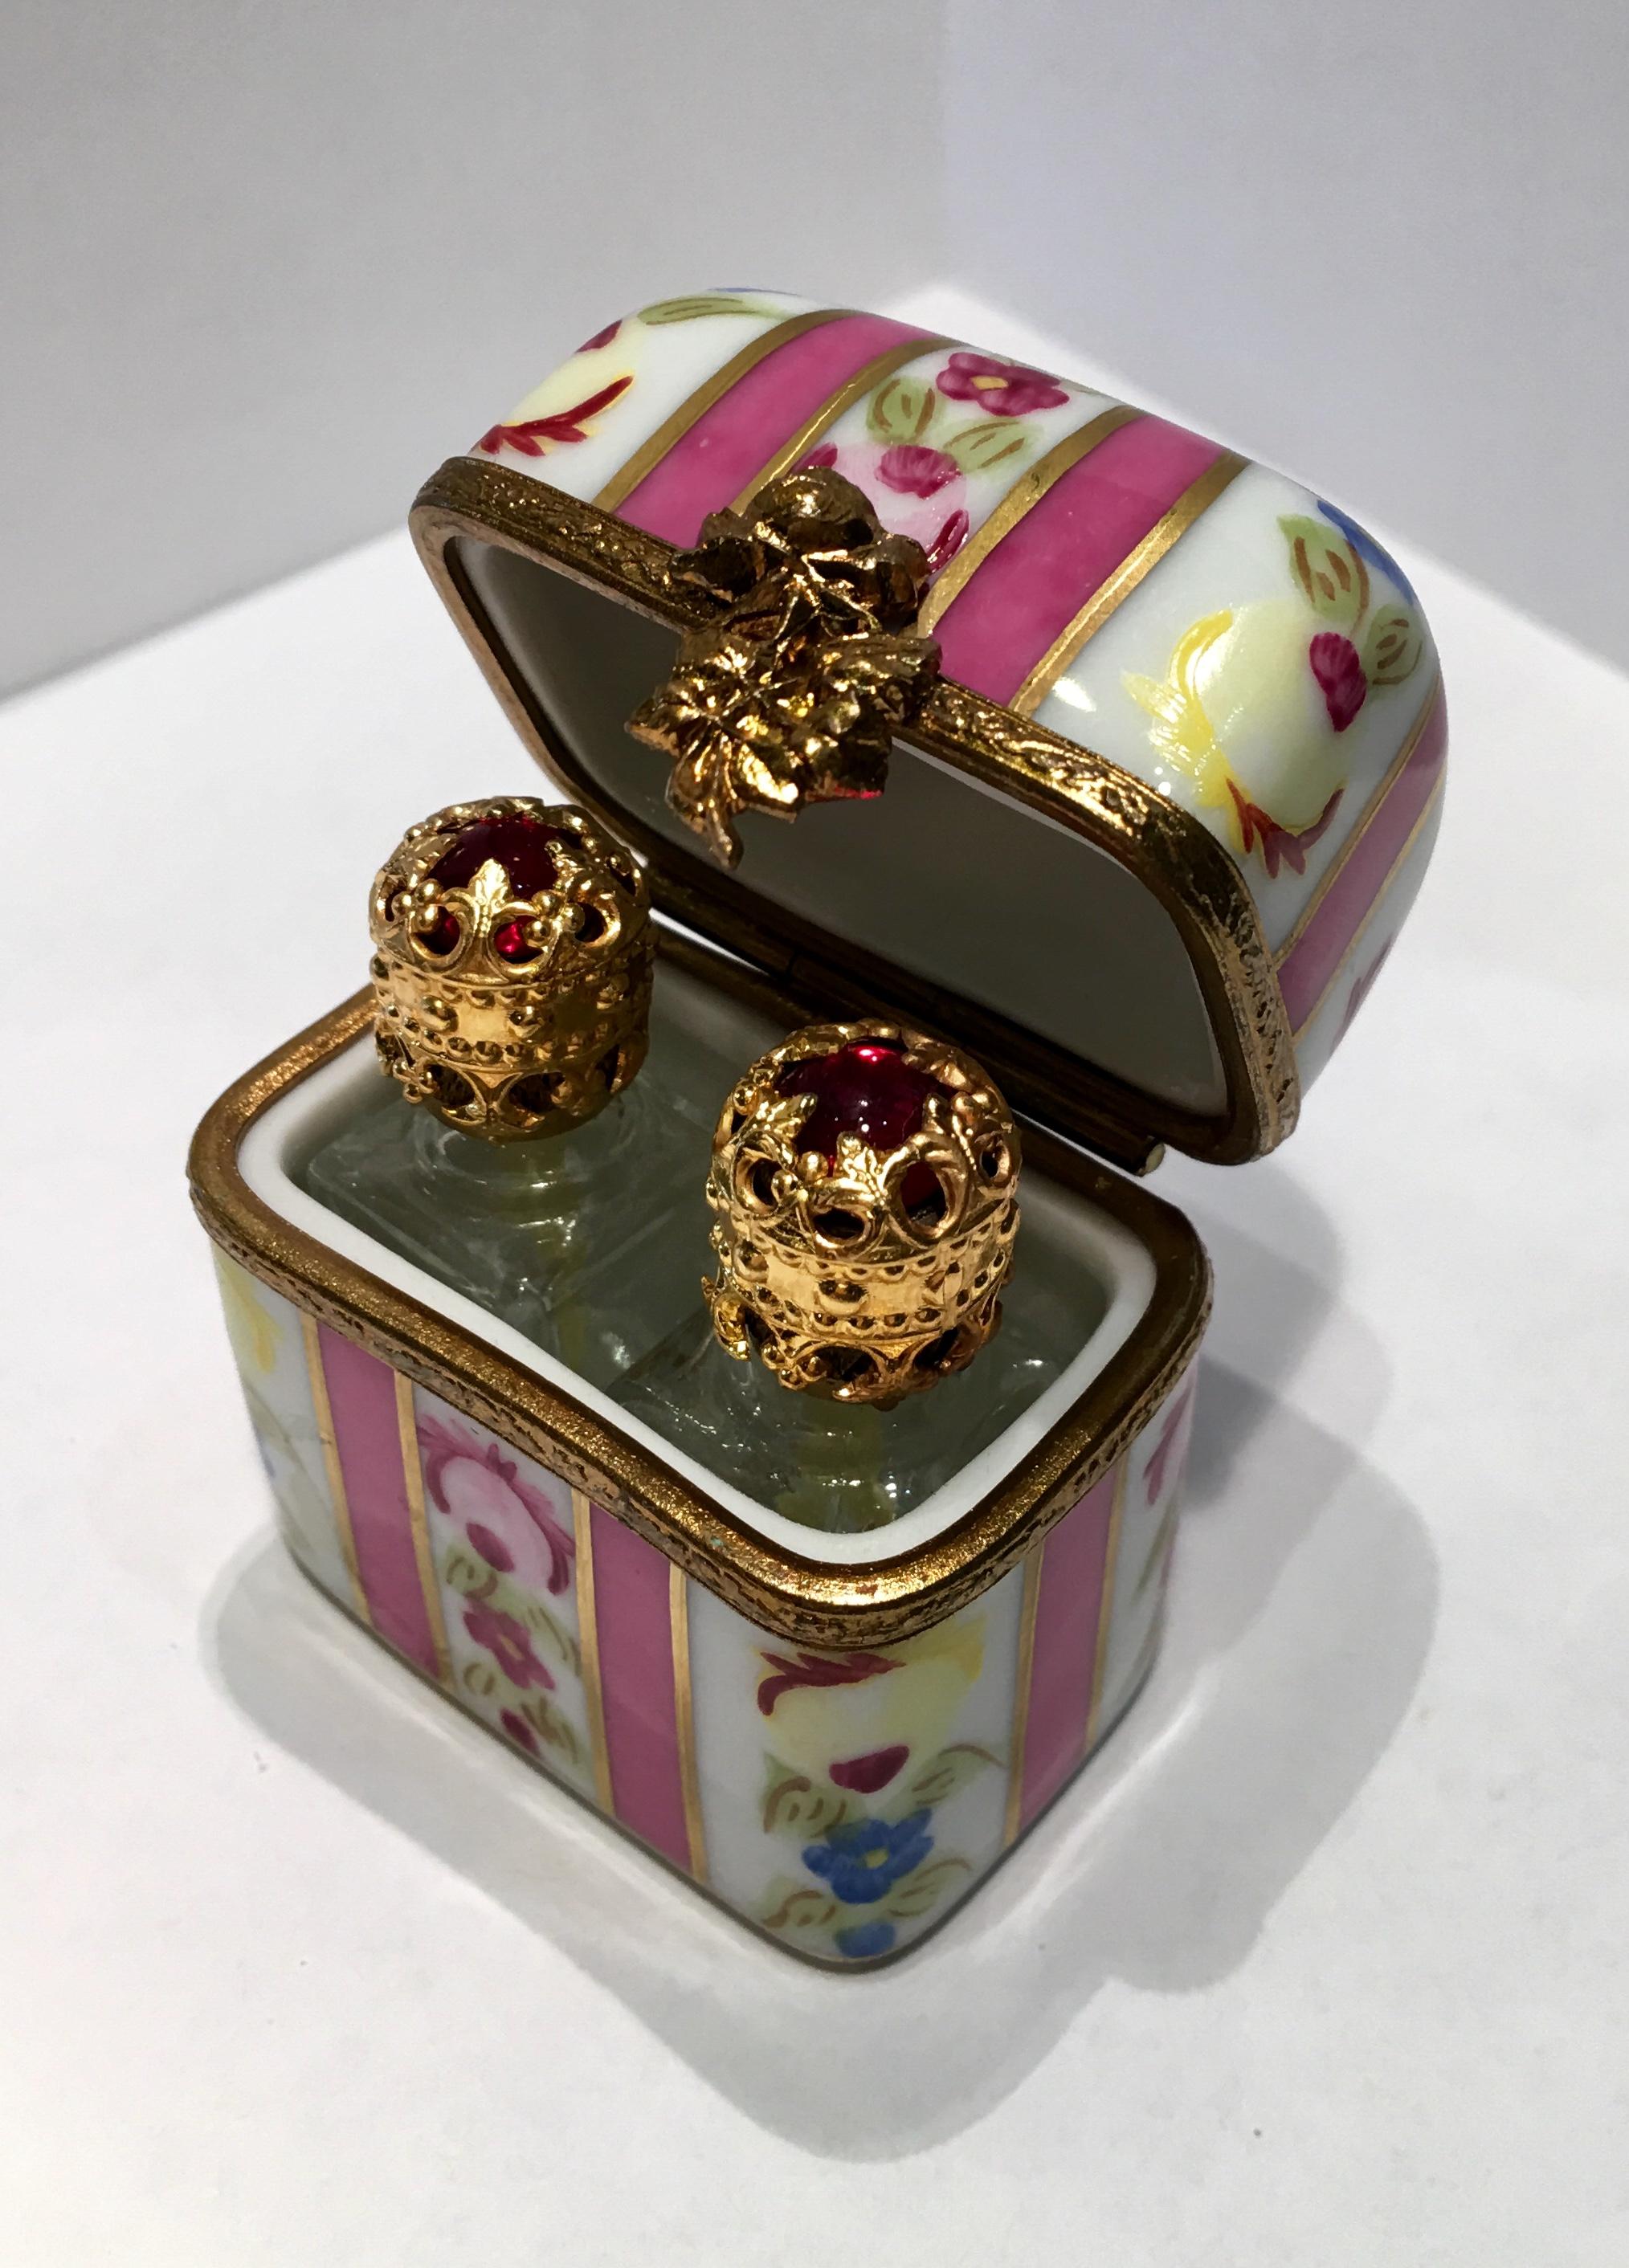 Exquisitely handmade and hand painted vintage miniature Limoges porcelain box with a hinged lid is decorated with flowers and features lavish stripes of 24-karat gold outlining wide pink stripes. The porcelain box and lid feature rims or fittings of